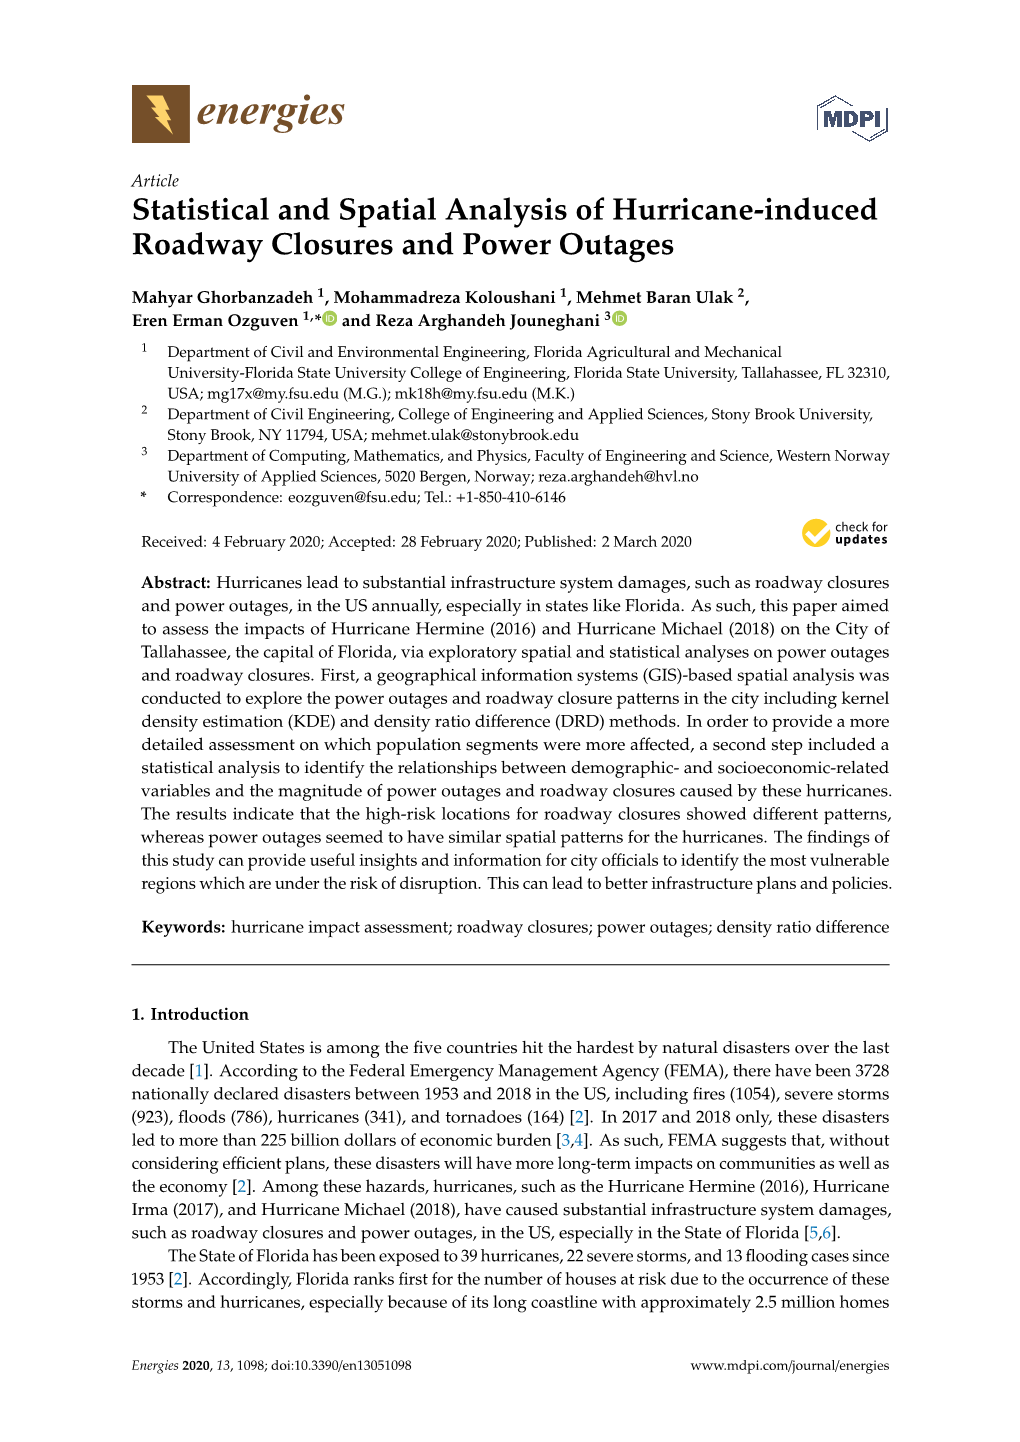 Statistical and Spatial Analysis of Hurricane-Induced Roadway Closures and Power Outages